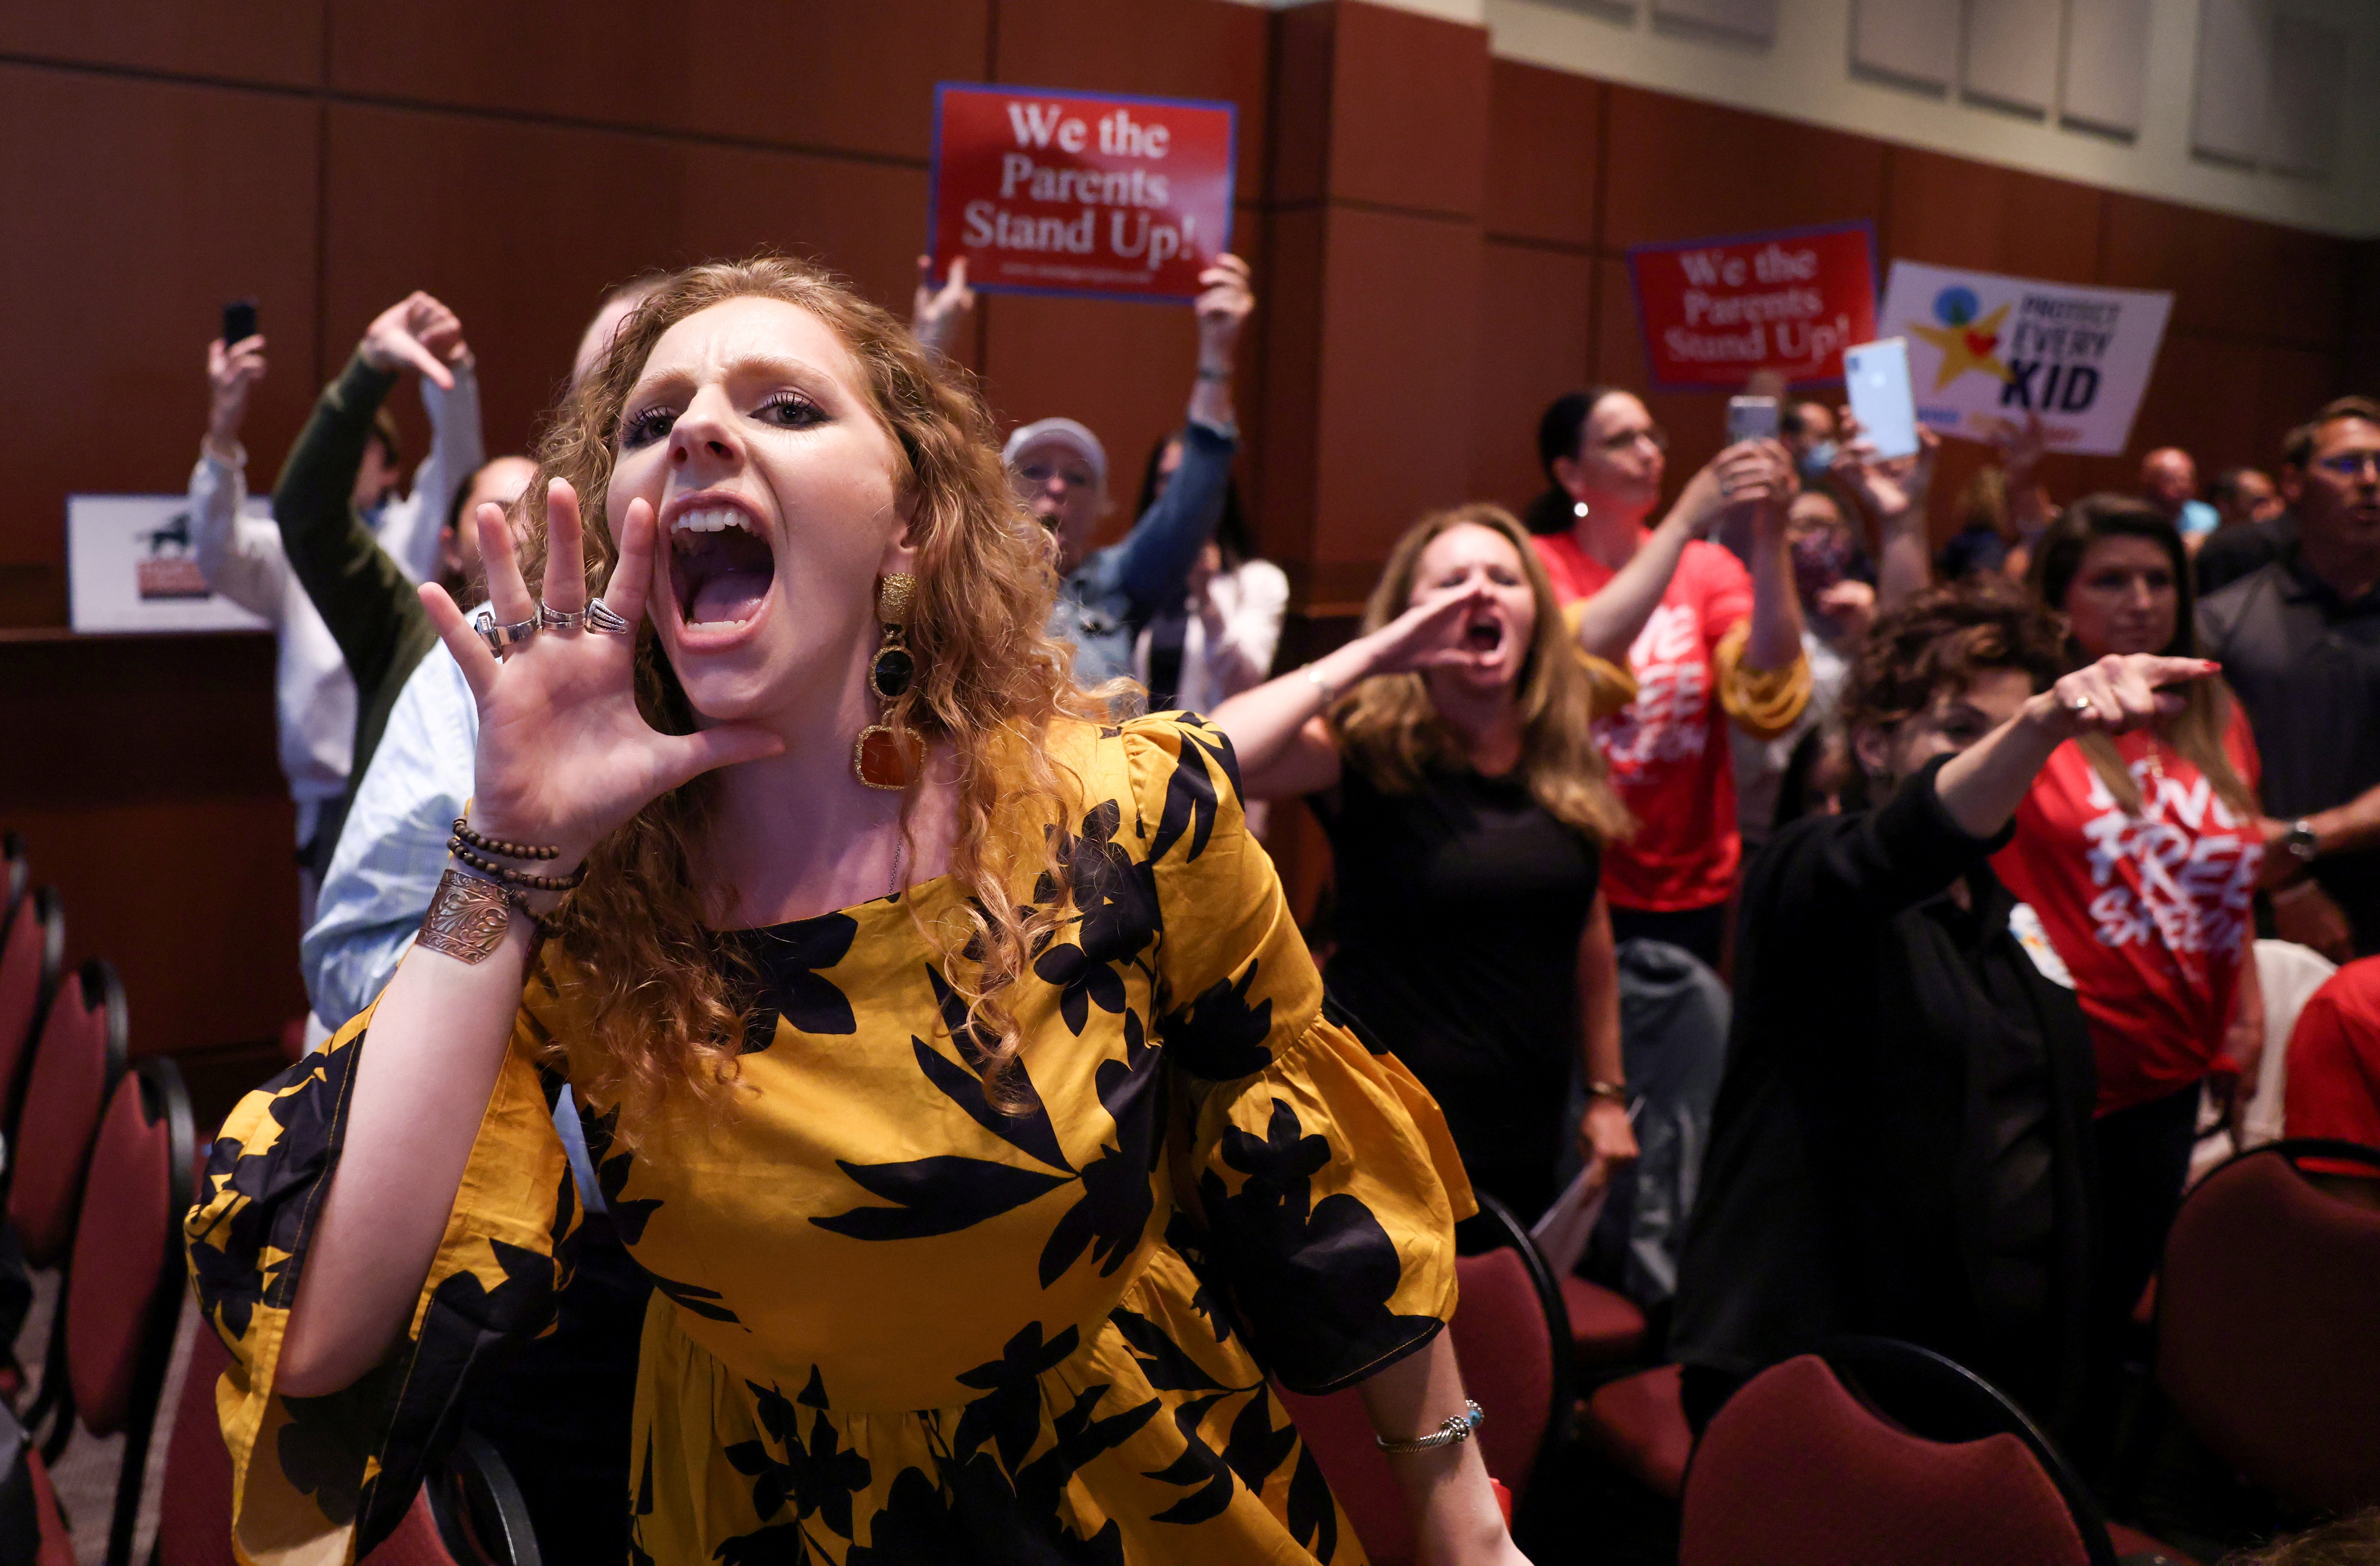 Angry parents and community members shut down a school board meeting to in Loudon County, Virginia, on the frontline of a right-wing culture war against discussions of race and gender in classrooms.